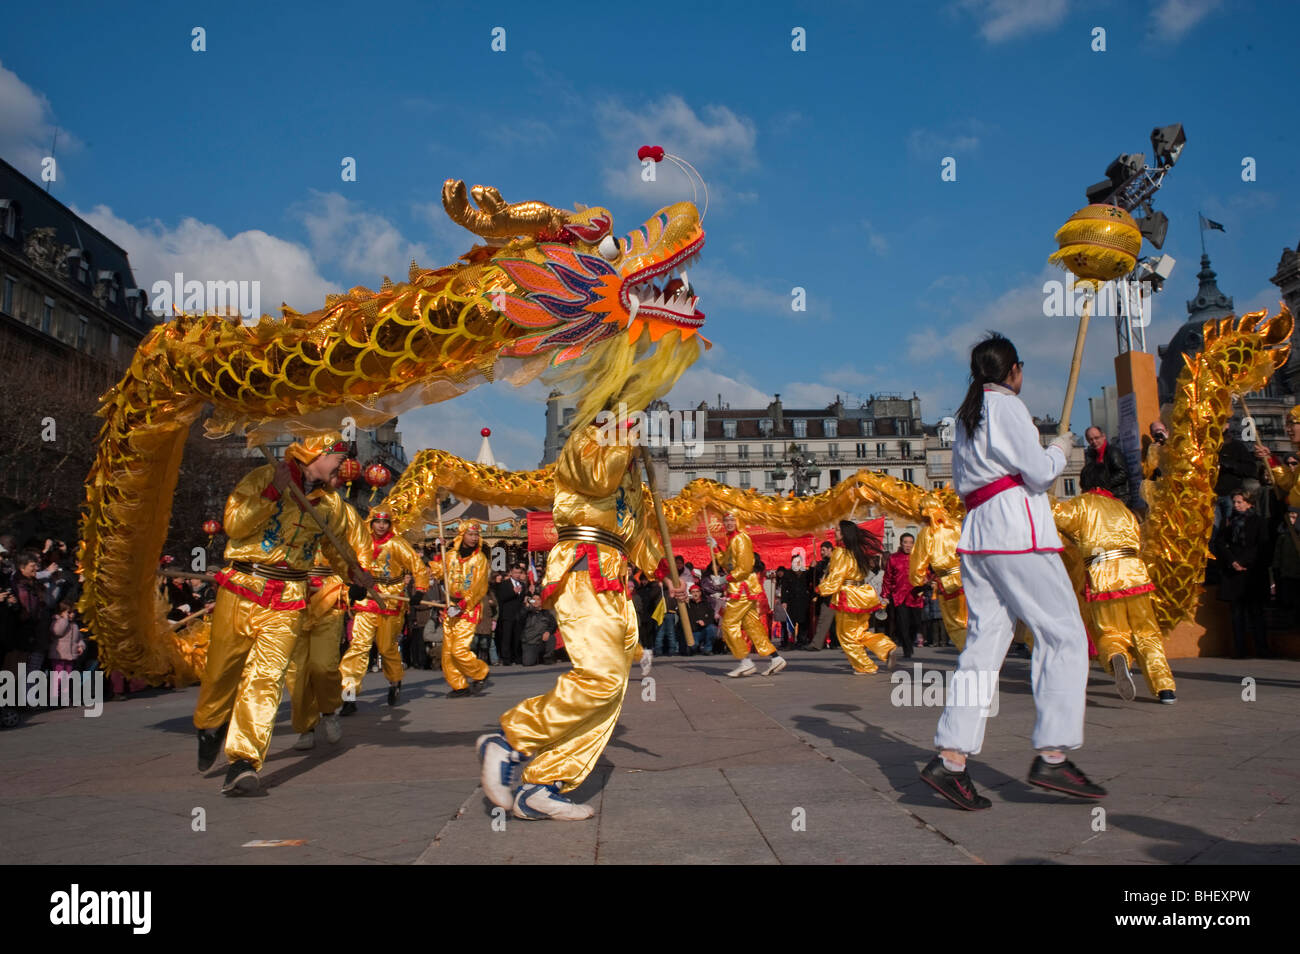 Paris, France, Asians Celebrating 'Chinese New year' Annual Street Carnival Parade, Chinese Dragon Dance, group dancing outdoors people teens  celebrating different cultures Stock Photo